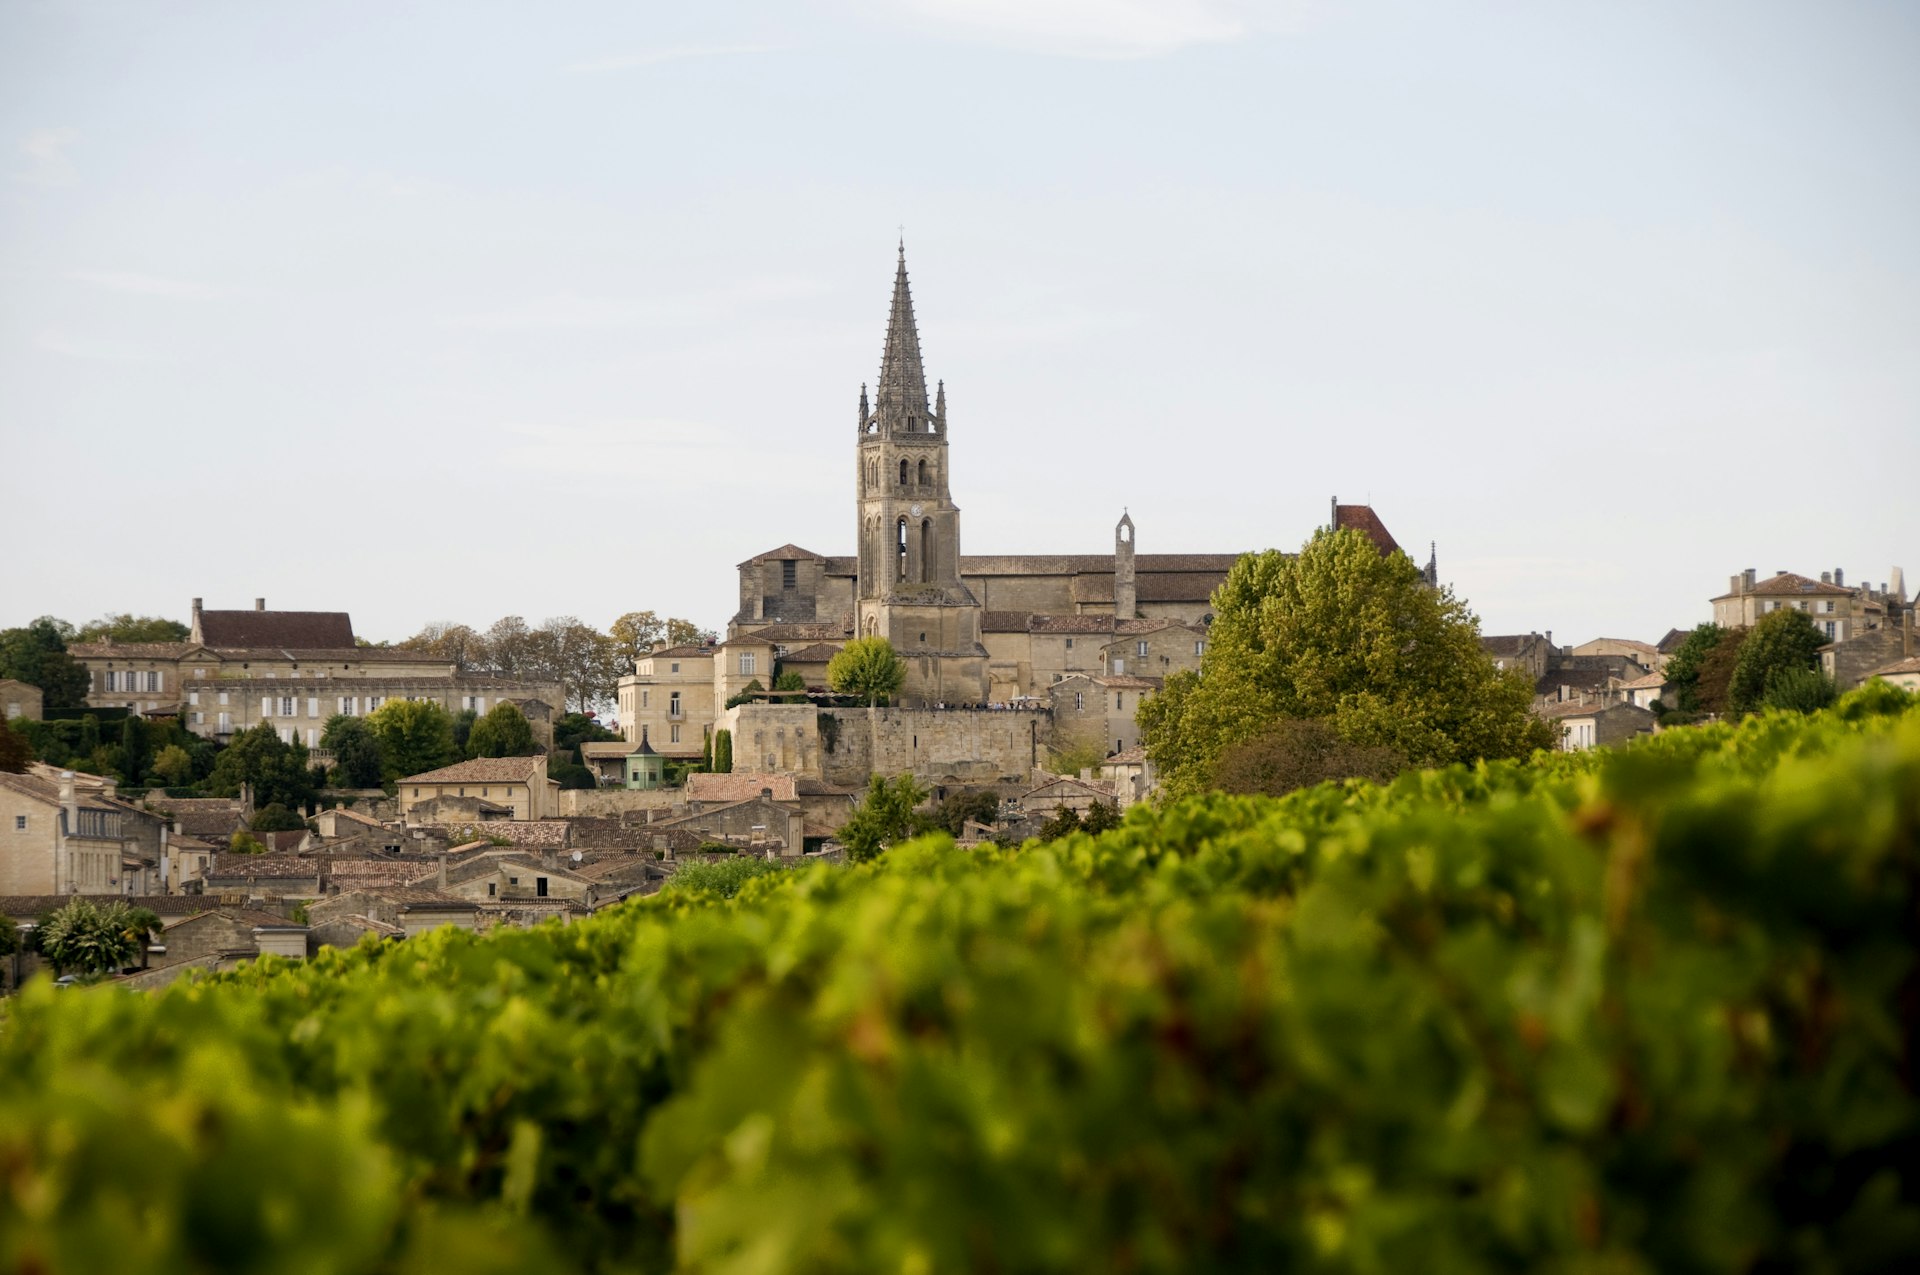 Spire of a cathedral in the medieval village of St-Émilion, France, rises above greenery